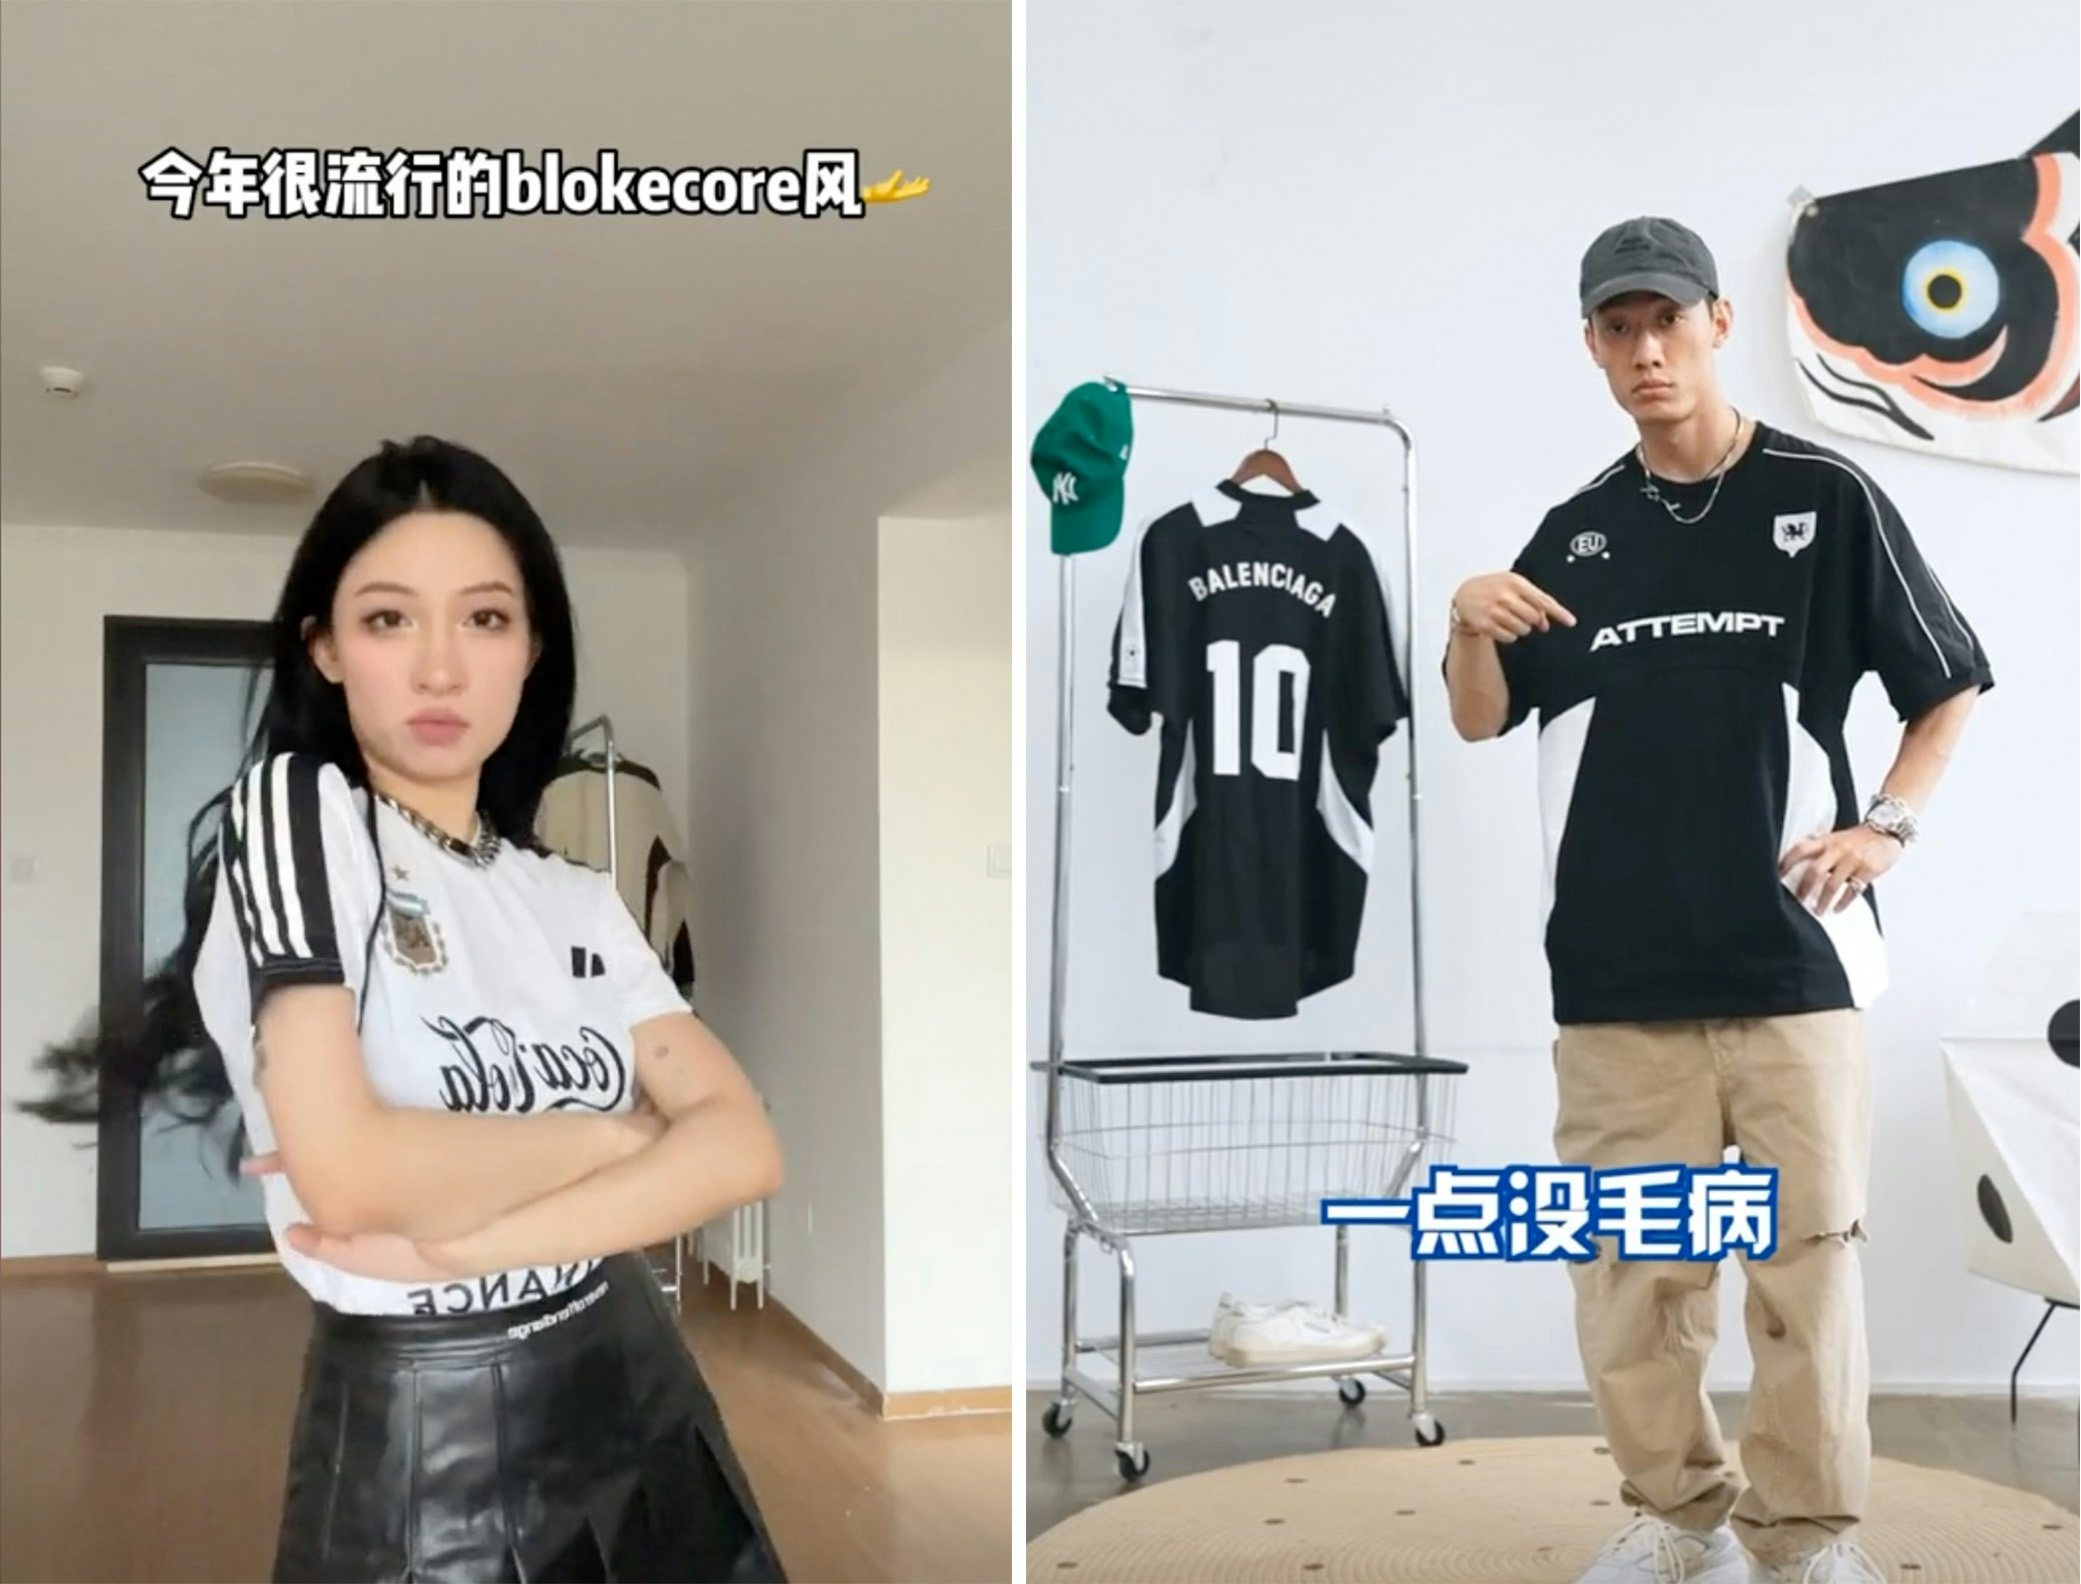 Blokecore, a soccer-inspired fashion trend, became popular in China after the 2022 FIFA World Cup. Photo: Douyin